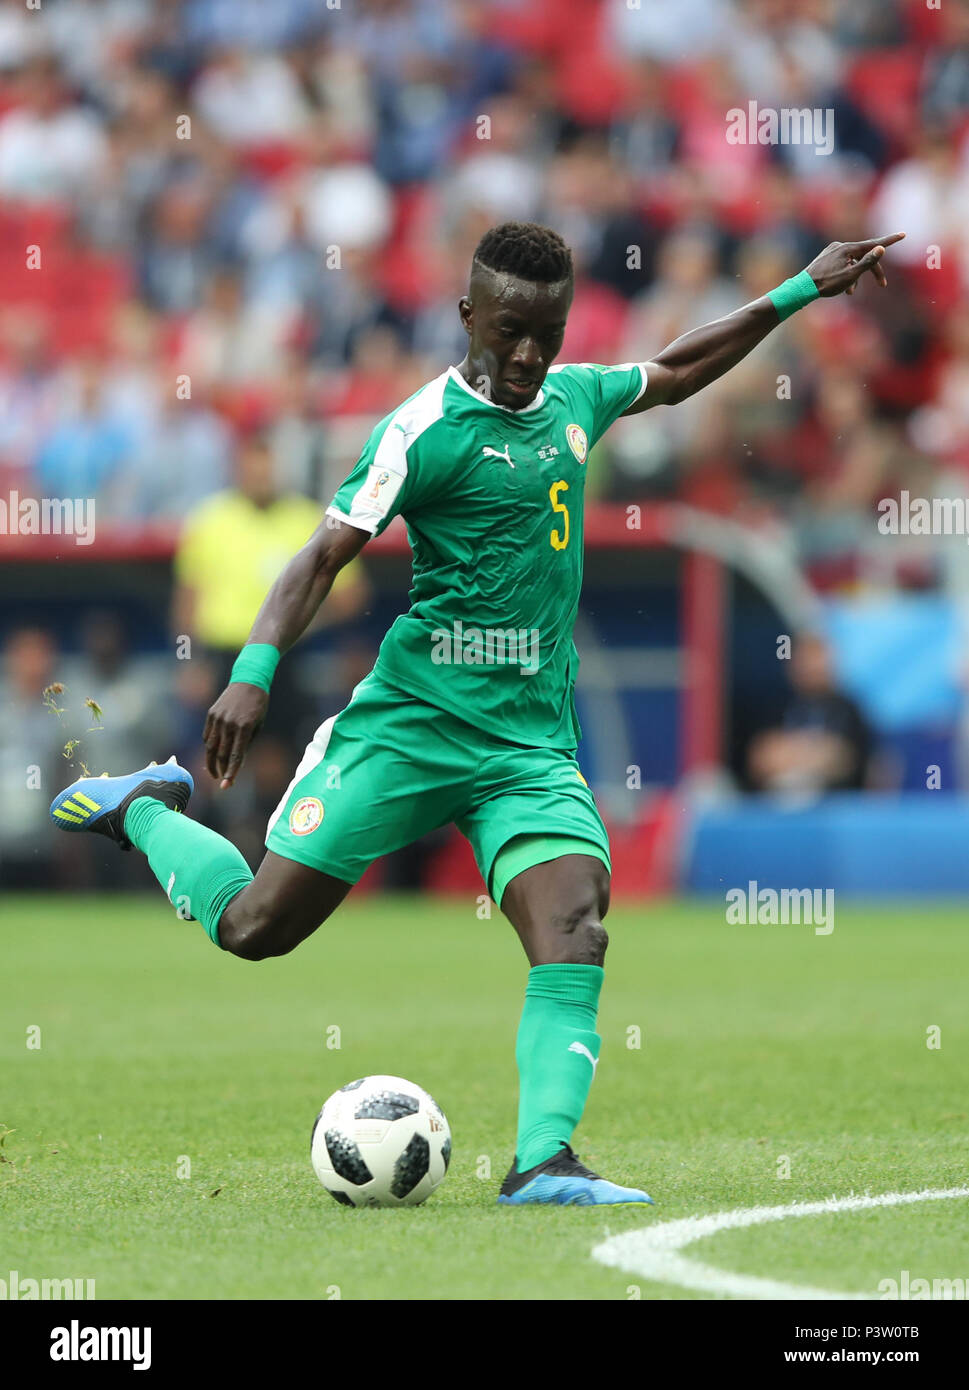 Moscow, Russia. 19th June, 2018. Idrissa Gana Gueye of Senegal shoots during a Group H match between Poland and Senegal at the 2018 FIFA World Cup in Moscow, Russia, June 19, 2018. Credit: Ye Pingfan/Xinhua/Alamy Live News Stock Photo